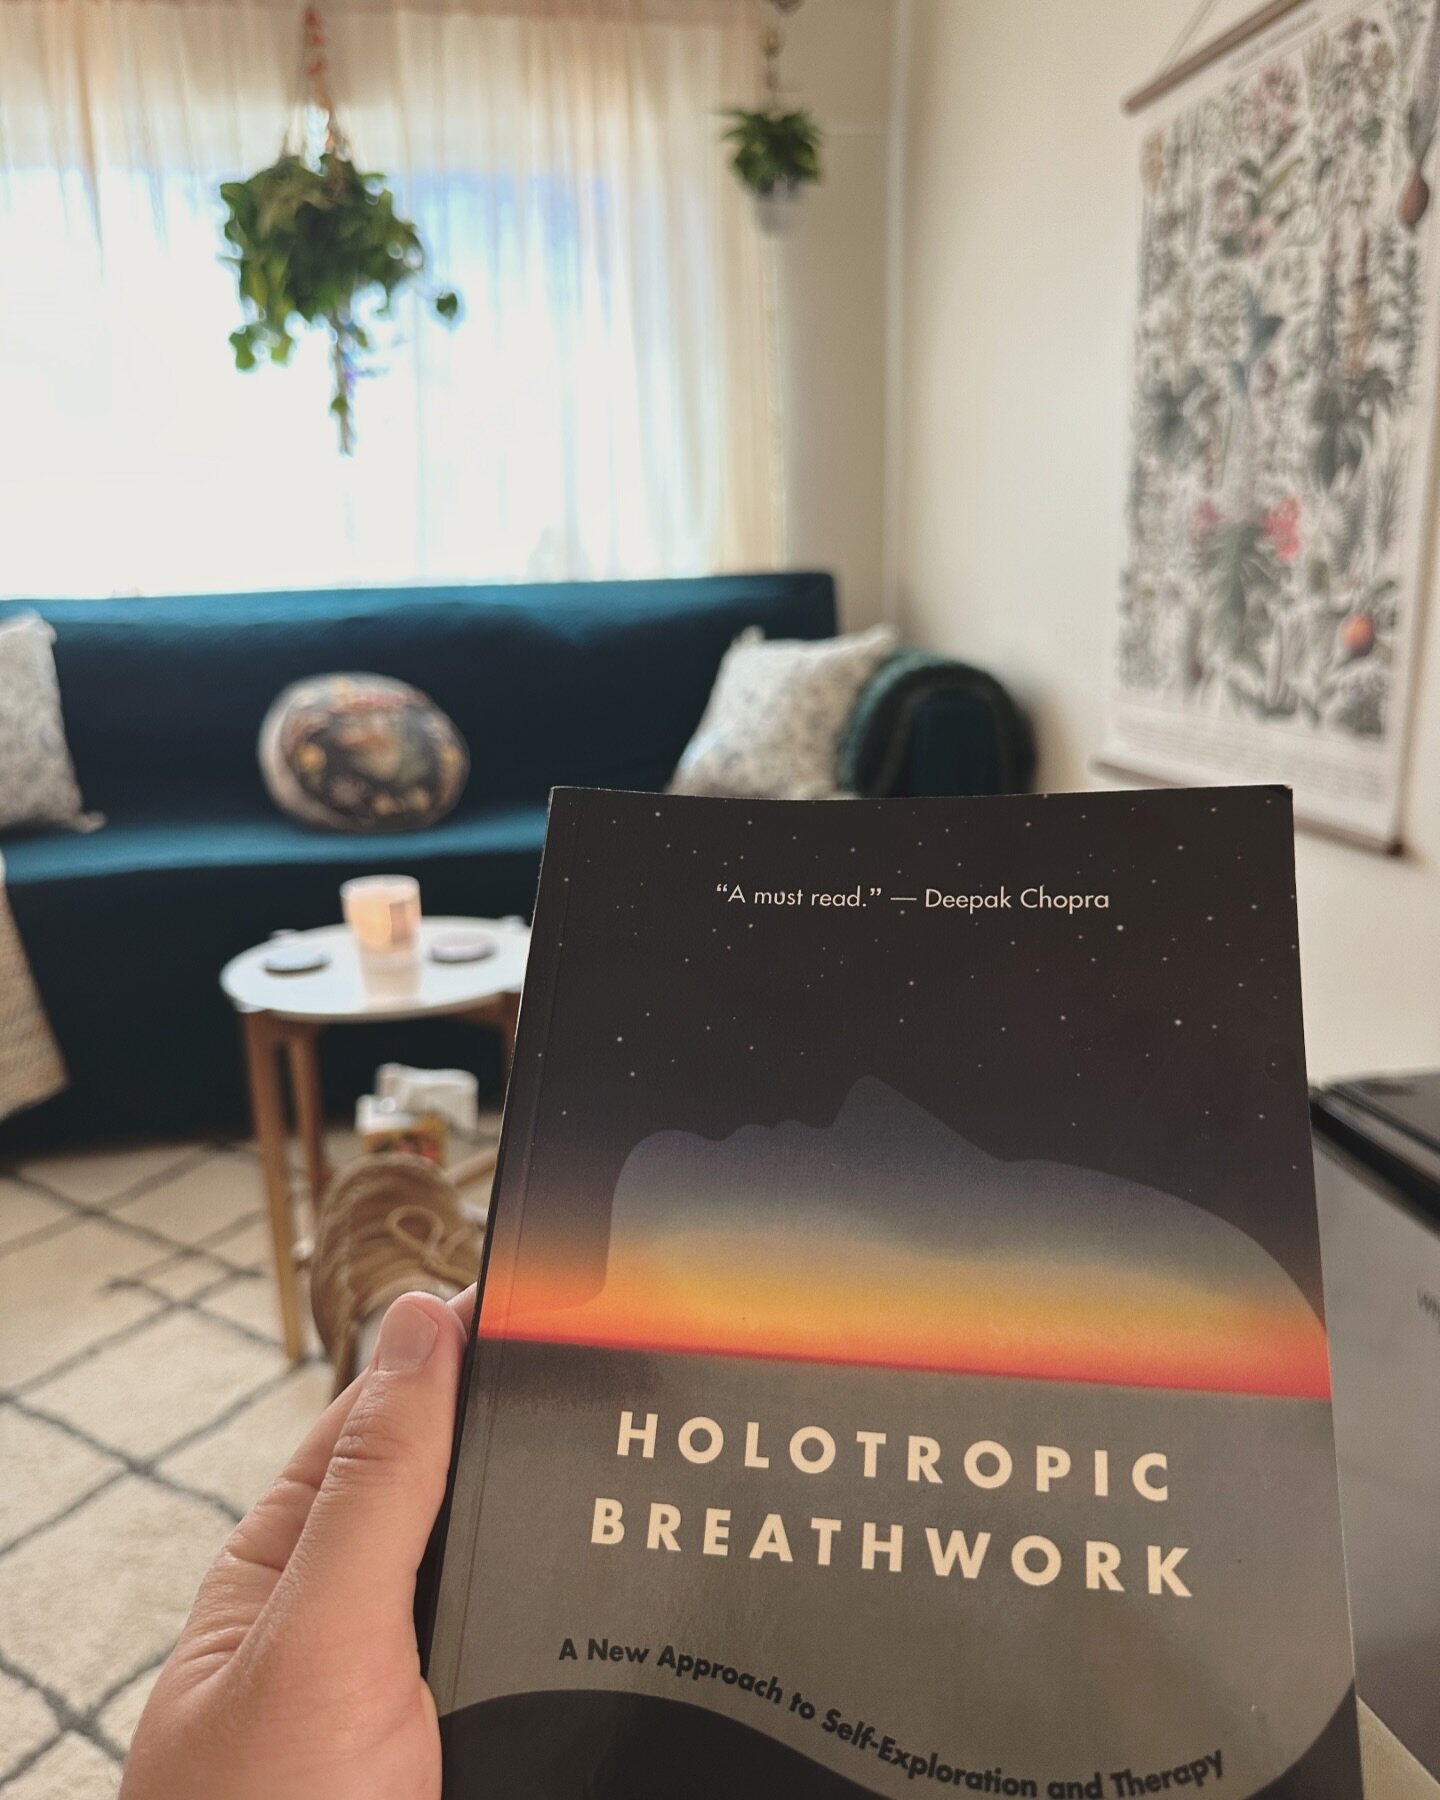 Loving this deep and beautiful book exploring the depths of the psyche and trans personal dimensions of consciousness. 

Highly recommend for those interested in utilizing breath work as a means of connecting to self through non-ordinary states of co